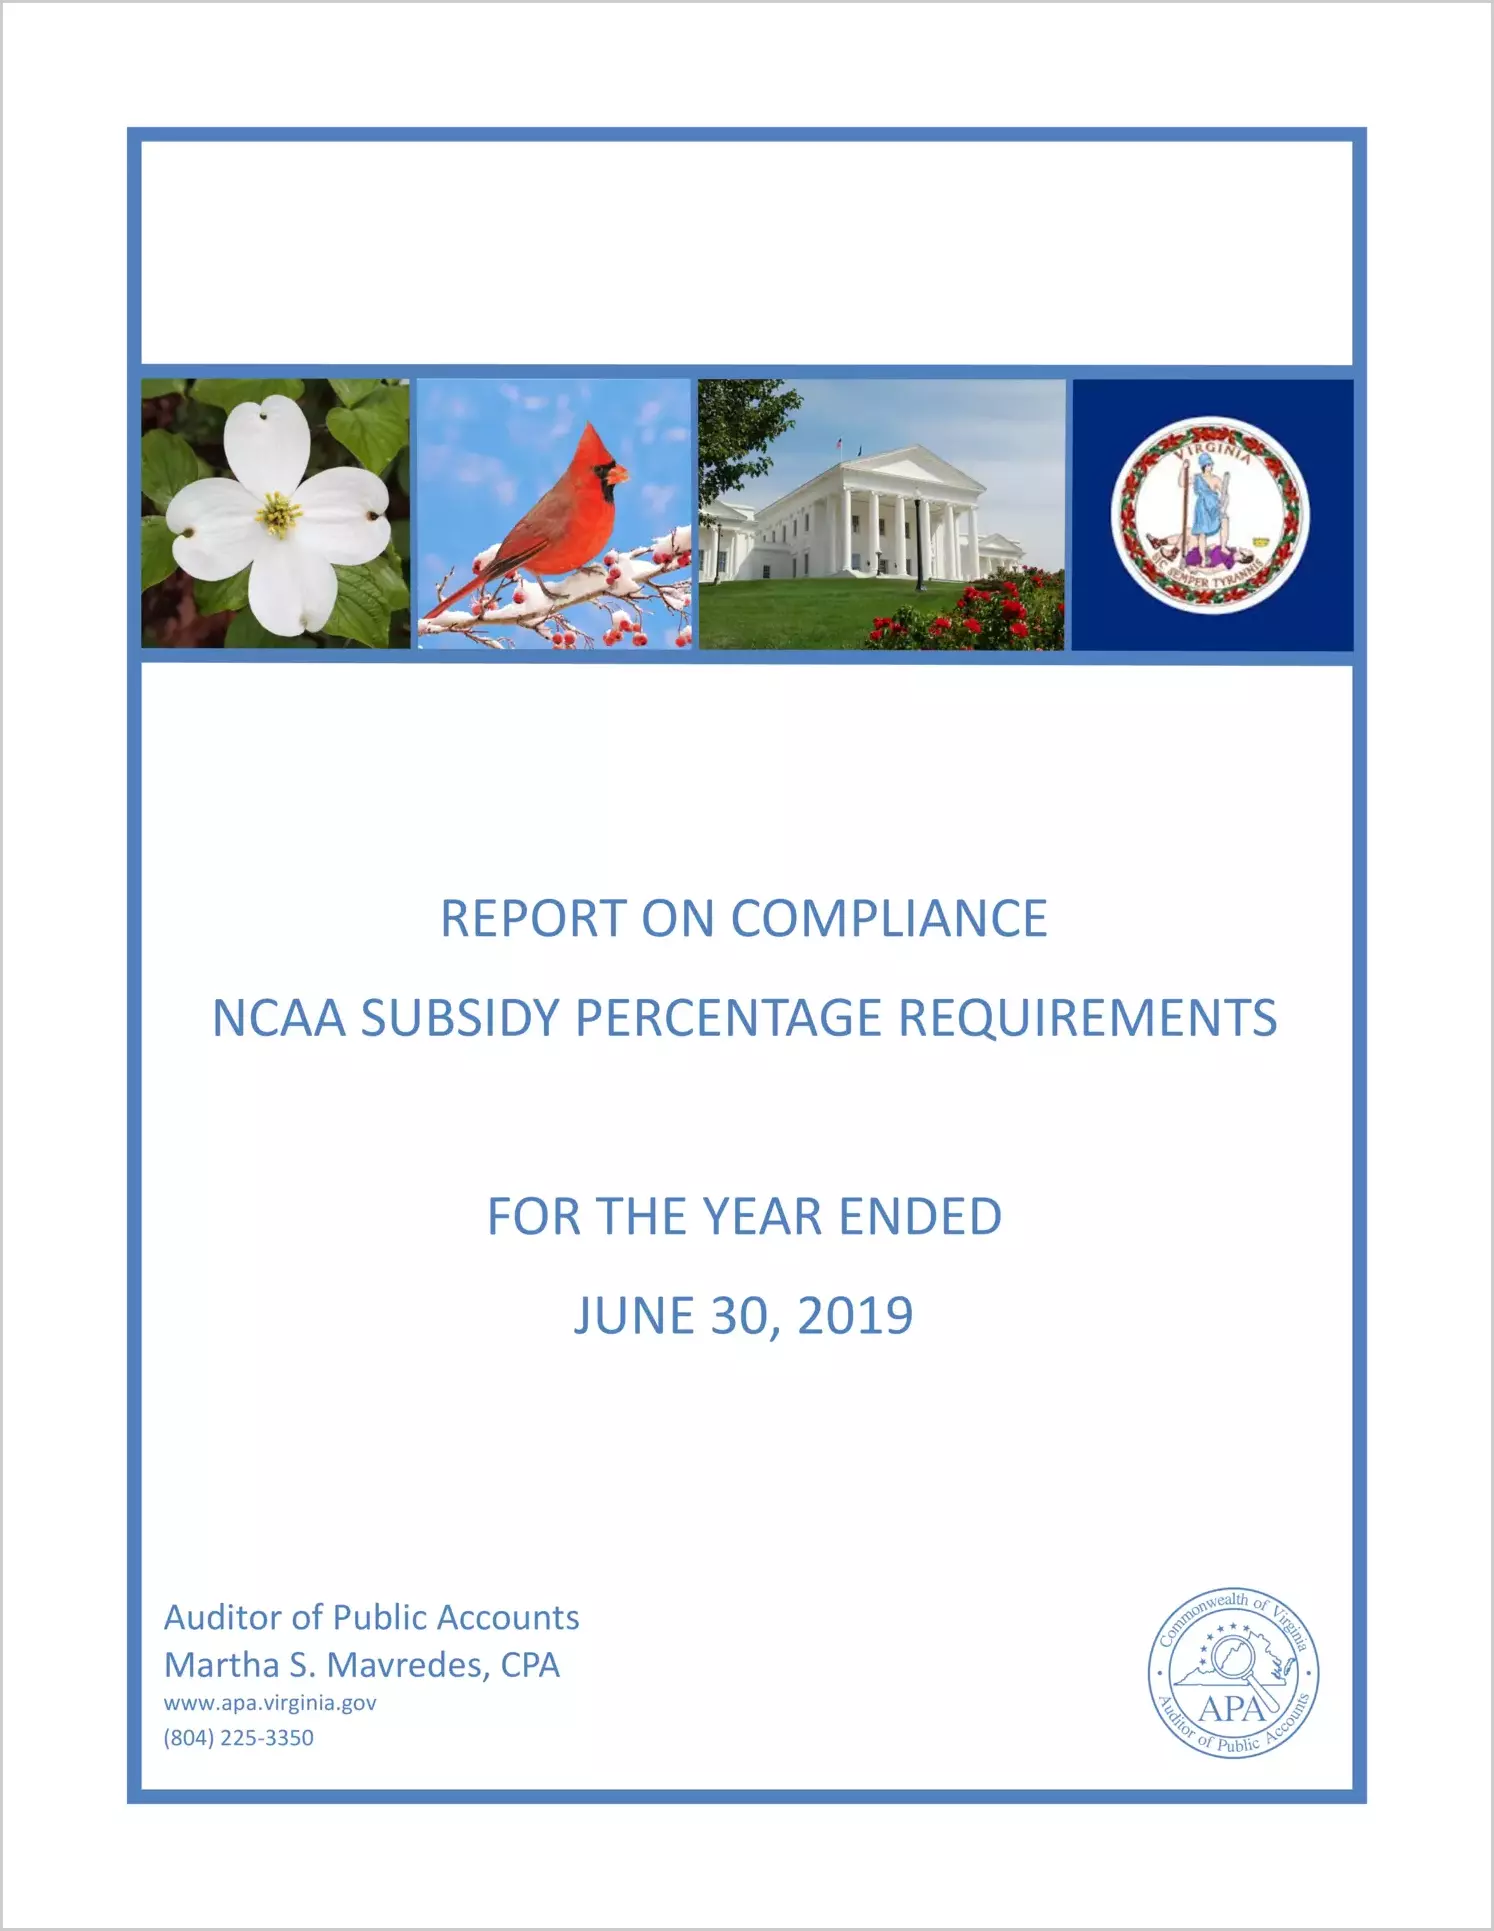 Report on Compliance - NCAA Subsidy Percentage Requirements for the year ended June 30, 2019